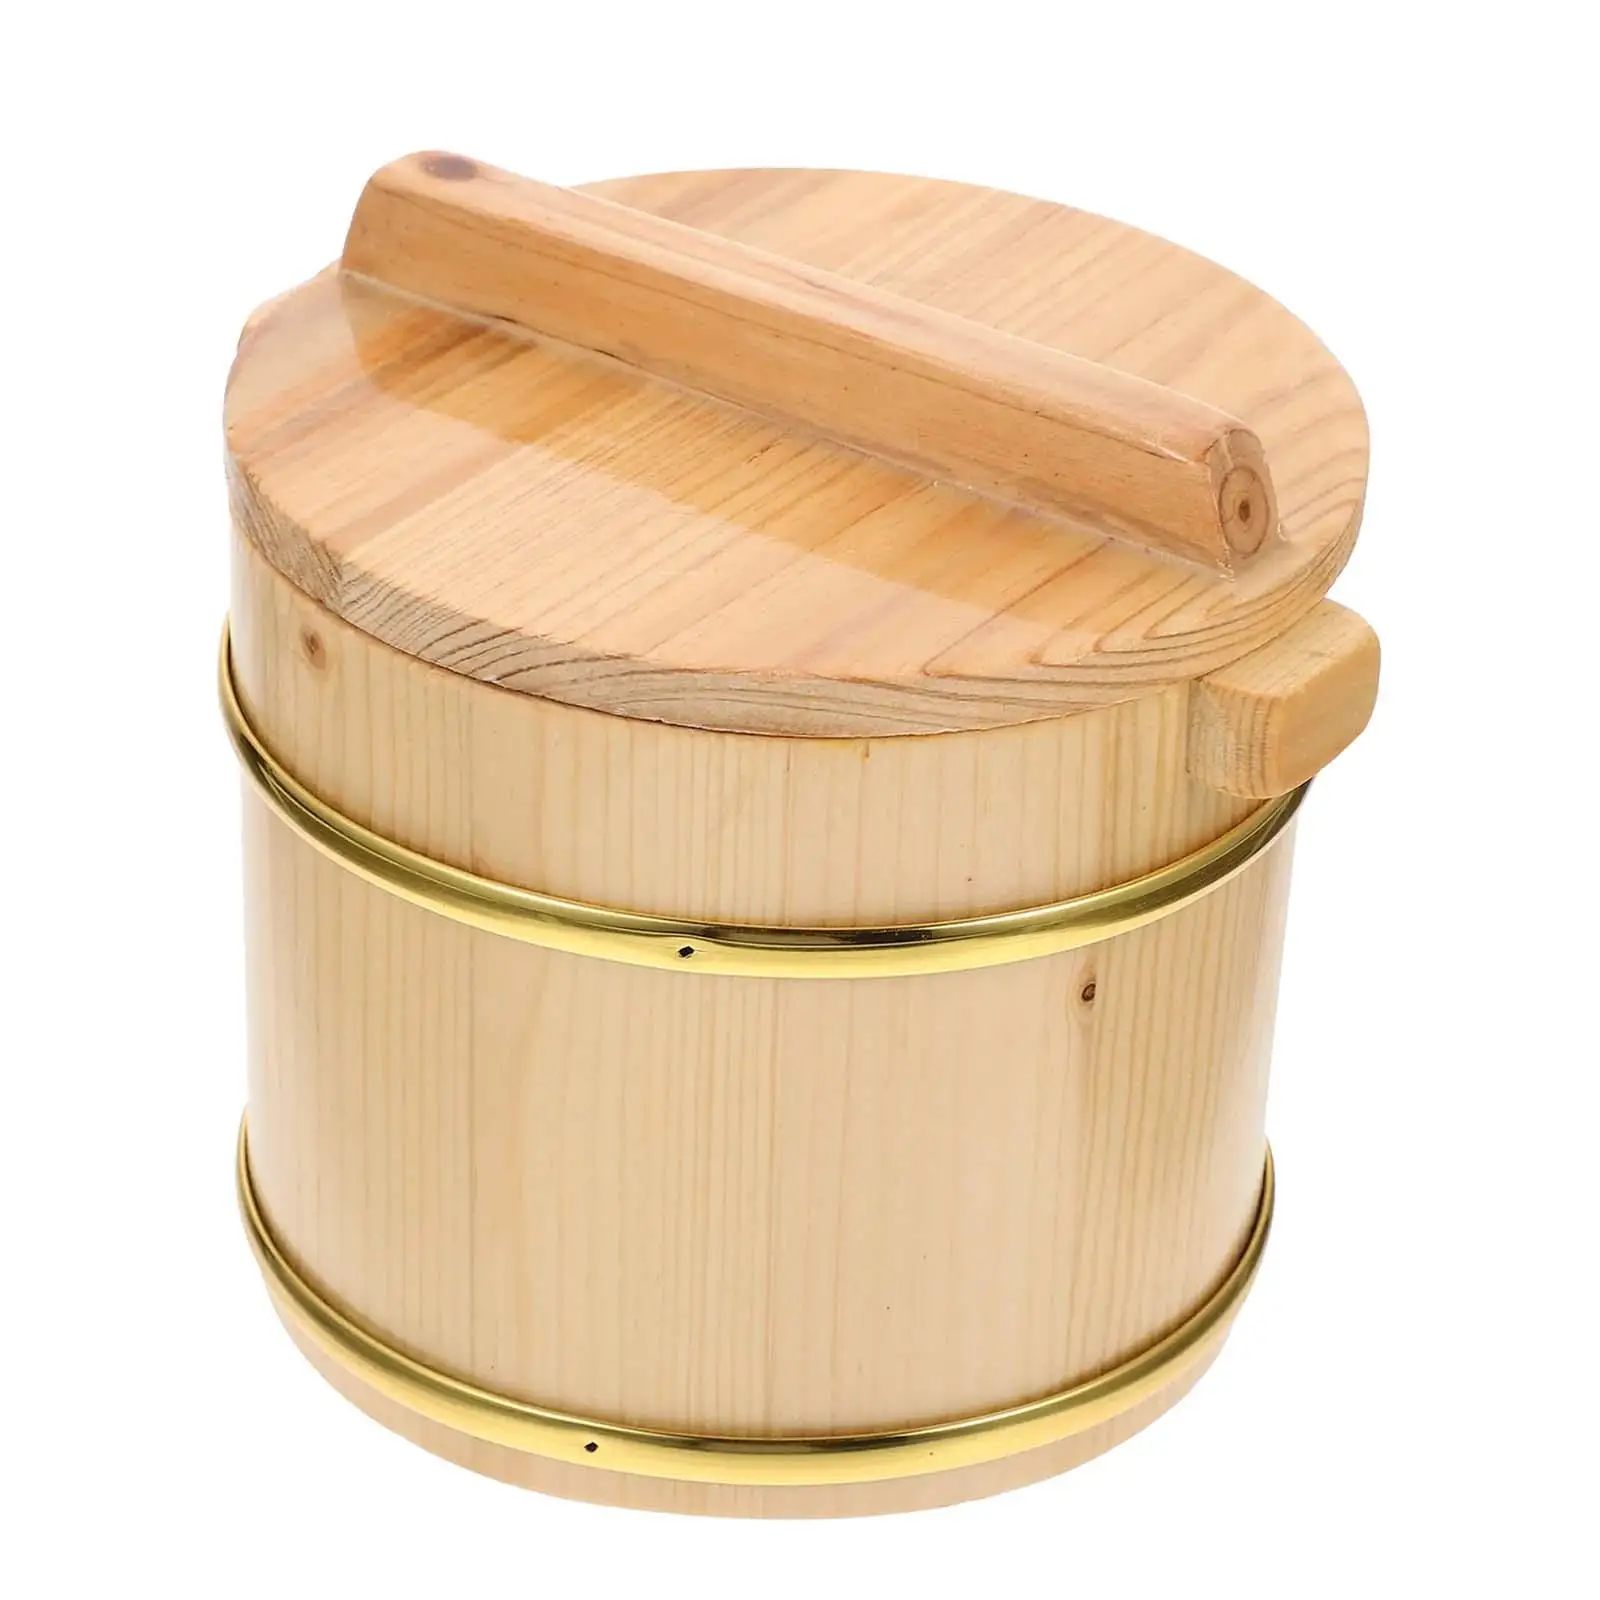 Japanese Rice Bucket Reusable Practical 16cm Rice Mixing Tub with Lid Rice Steamed Cask for Kitchen Cooking Restaurant